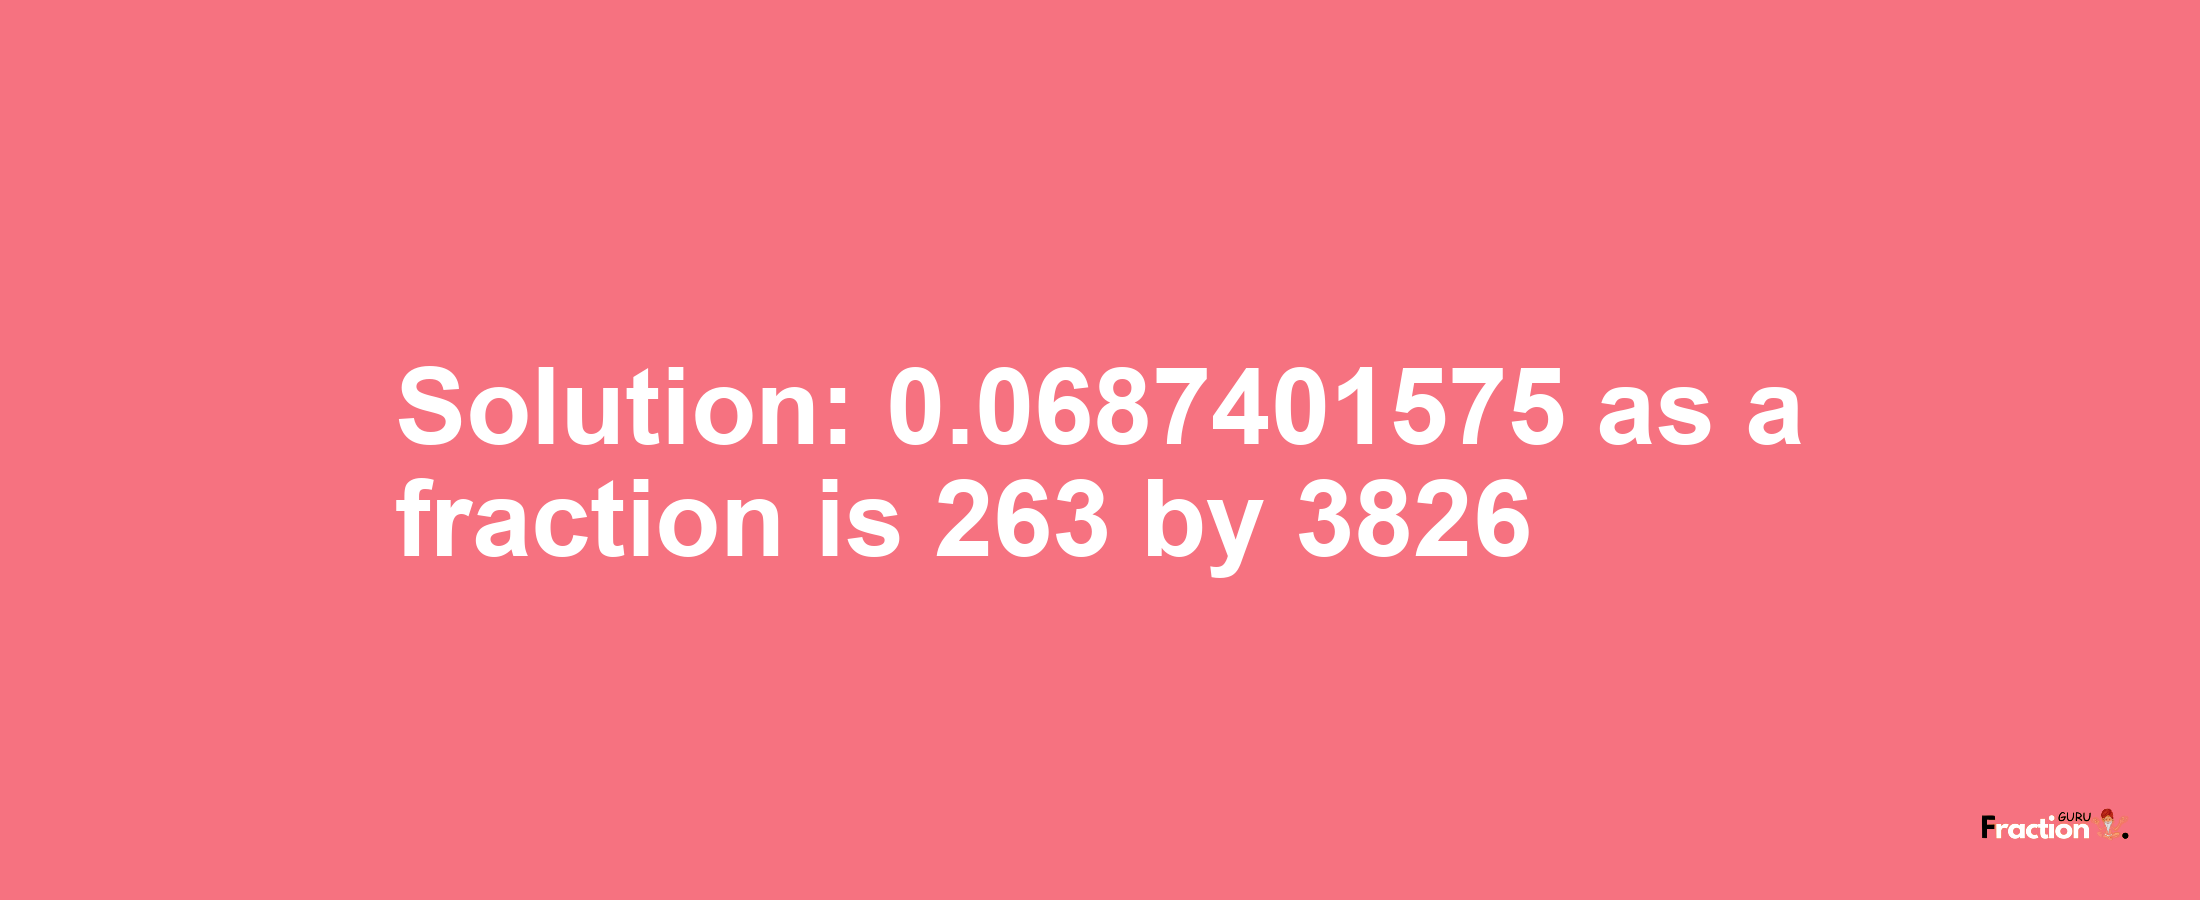 Solution:0.0687401575 as a fraction is 263/3826